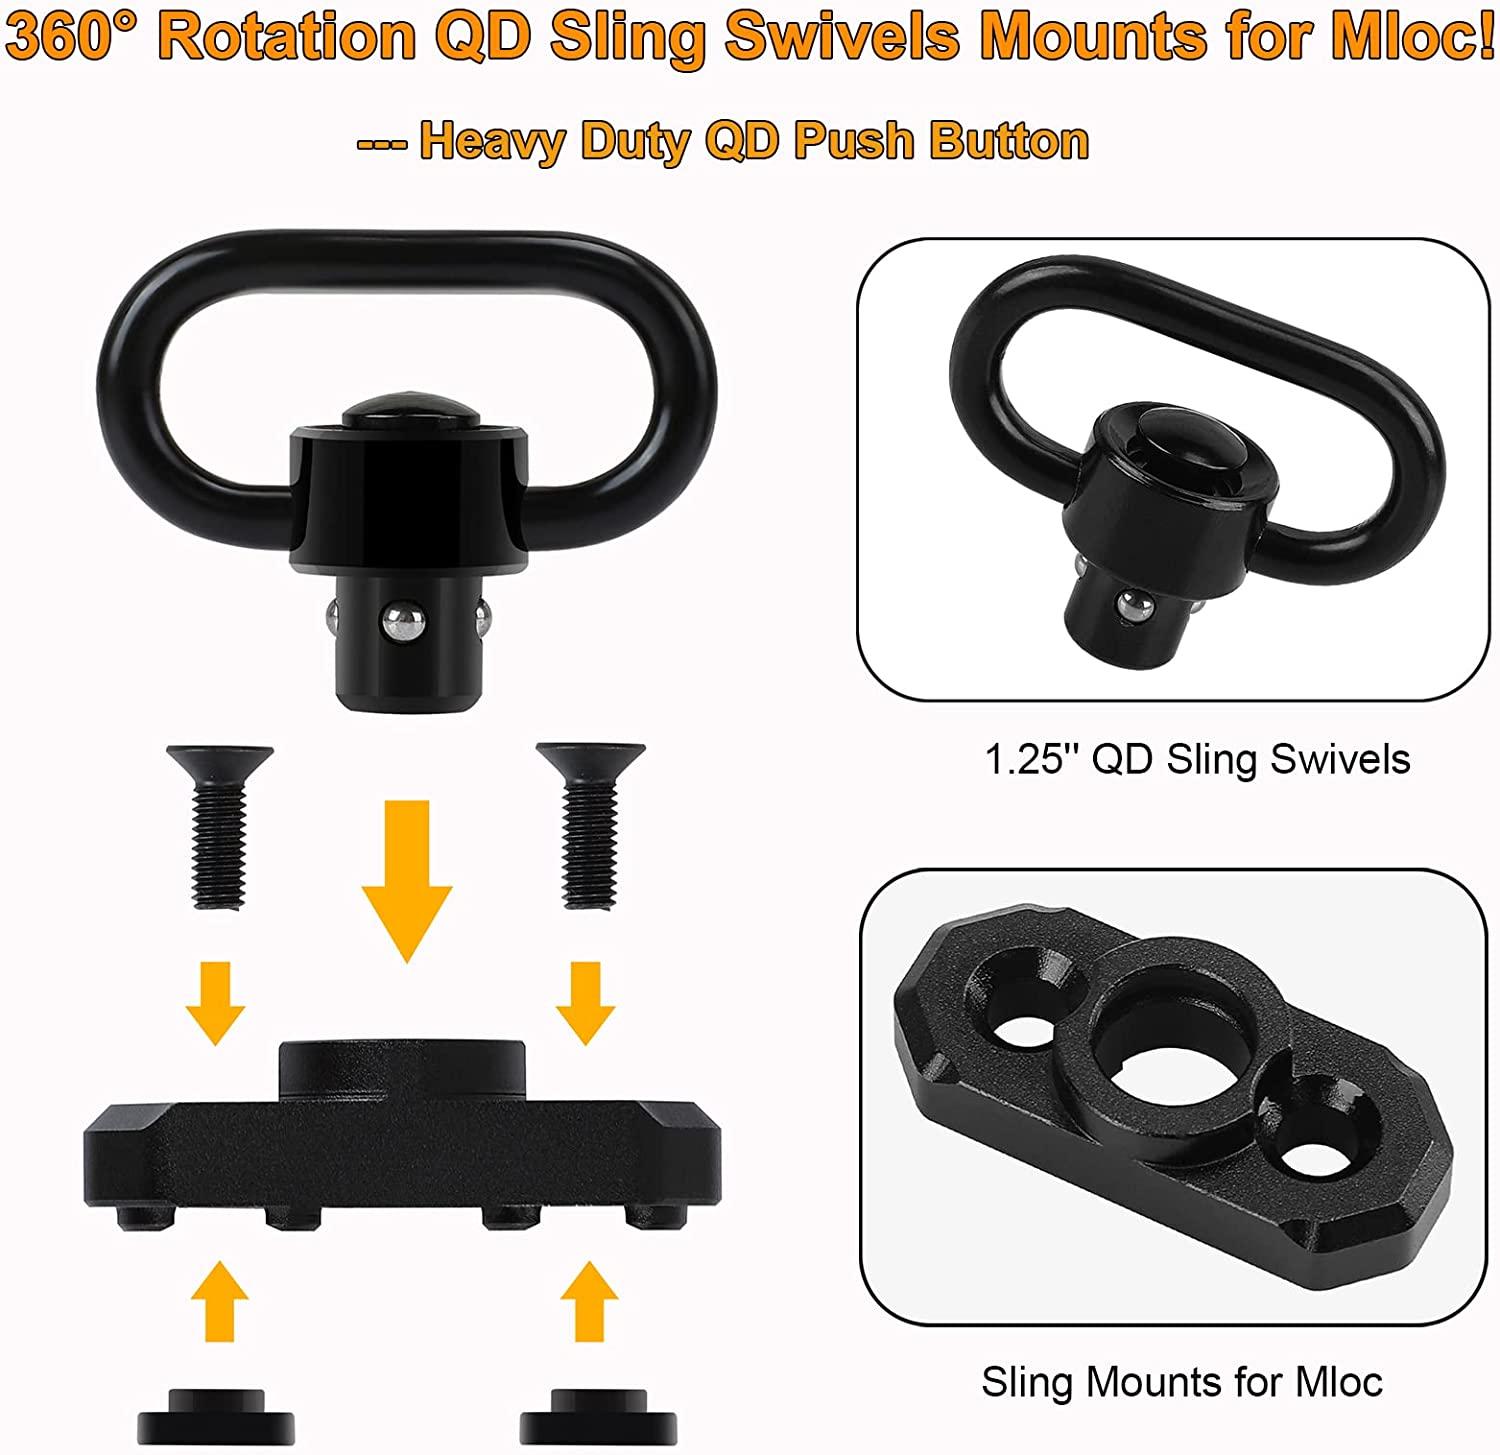 REERON 2 Point Sling & Mloc Sling Mount - Adjustable Extra Long Two Point  Traditional Rifle Sling with 2 Pack 1.25 QD Sling Swivels Mounts for M  Lock Rail System 2 Pack 360 Rotation Sling Mounts